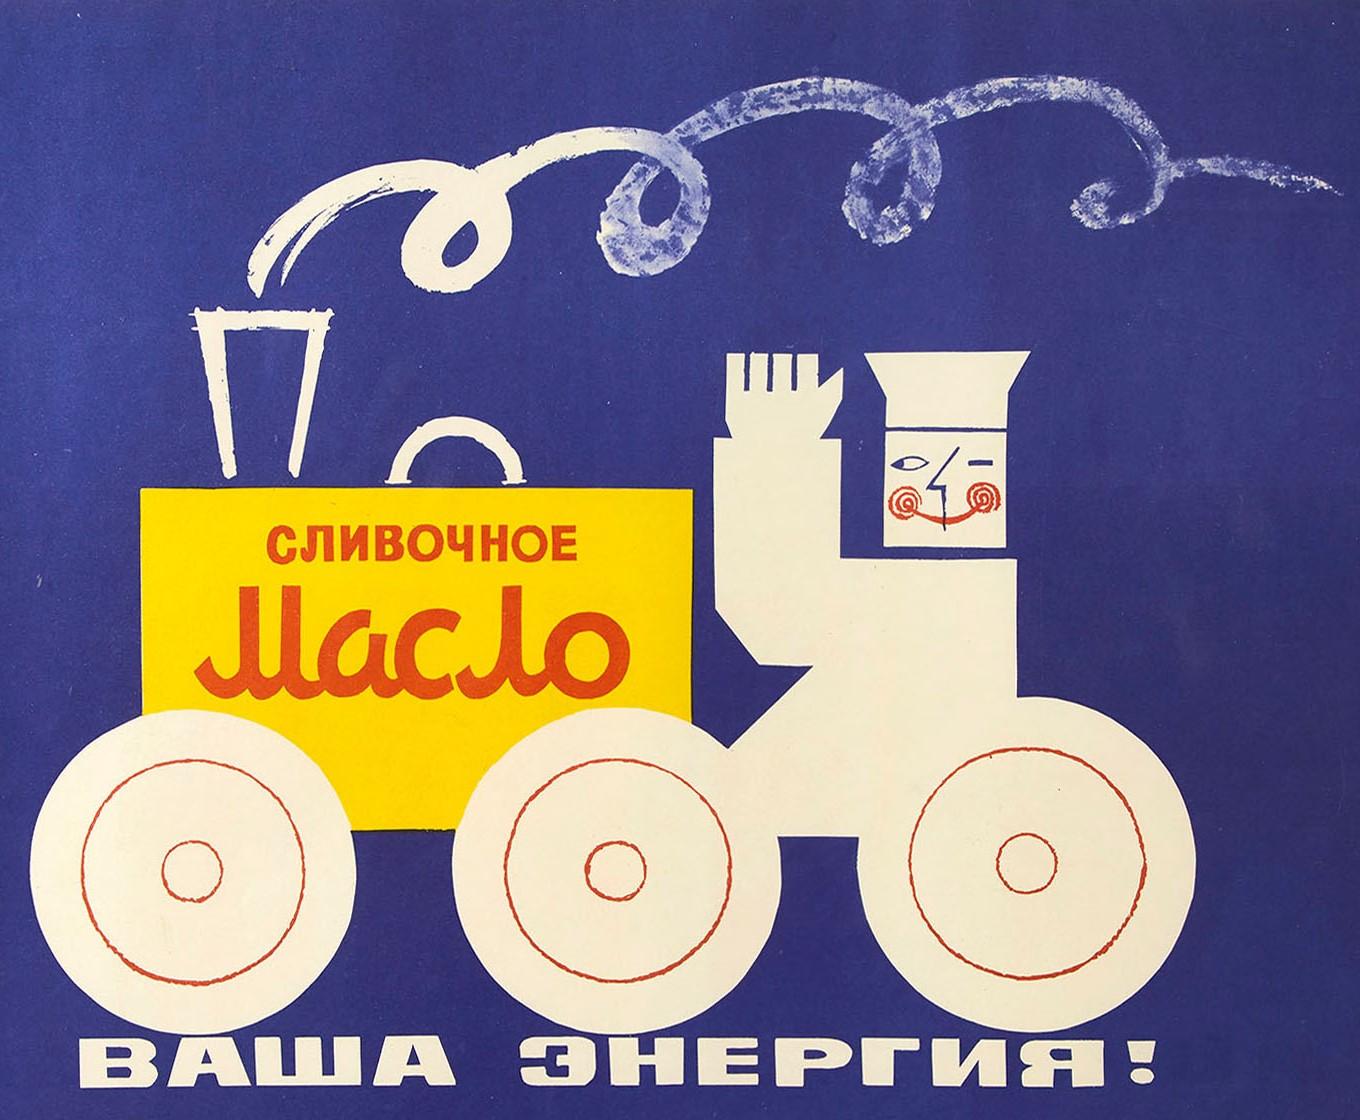 Original vintage Soviet food advertising poster - Butter Is Your Energy - featuring a fun graphic design illustration of a smiling driver on a steam train or tractor powered by butter as the engine with the steam rising against the blue background